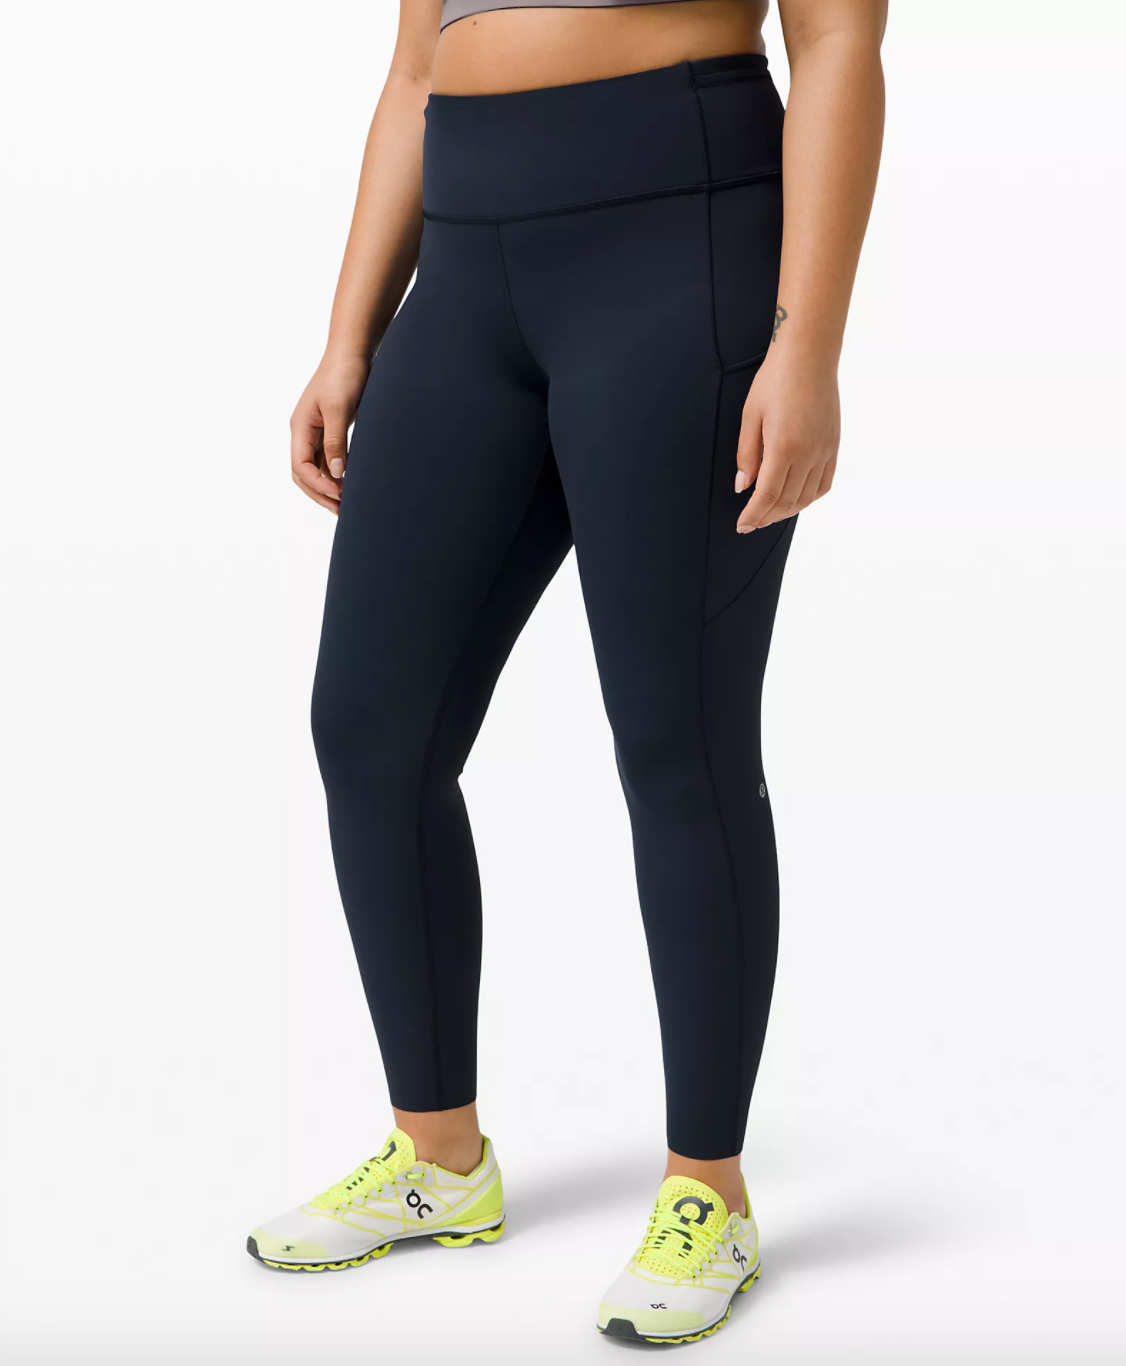 Fast and Free High-Rise Tight 28, Women's Leggings/Tights, lululemon